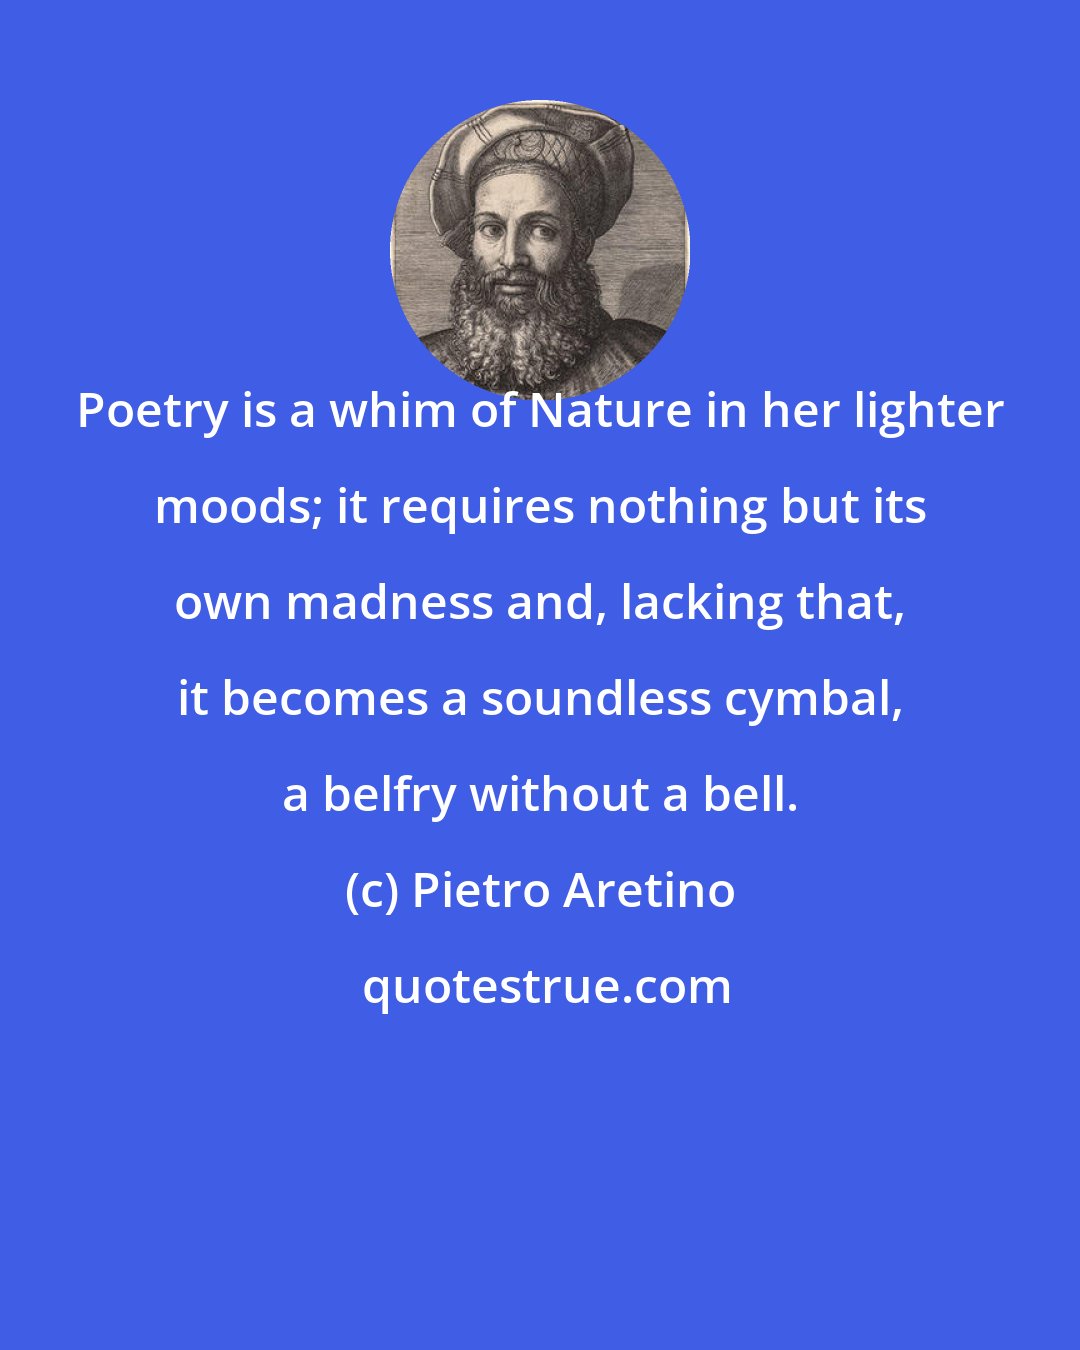 Pietro Aretino: Poetry is a whim of Nature in her lighter moods; it requires nothing but its own madness and, lacking that, it becomes a soundless cymbal, a belfry without a bell.